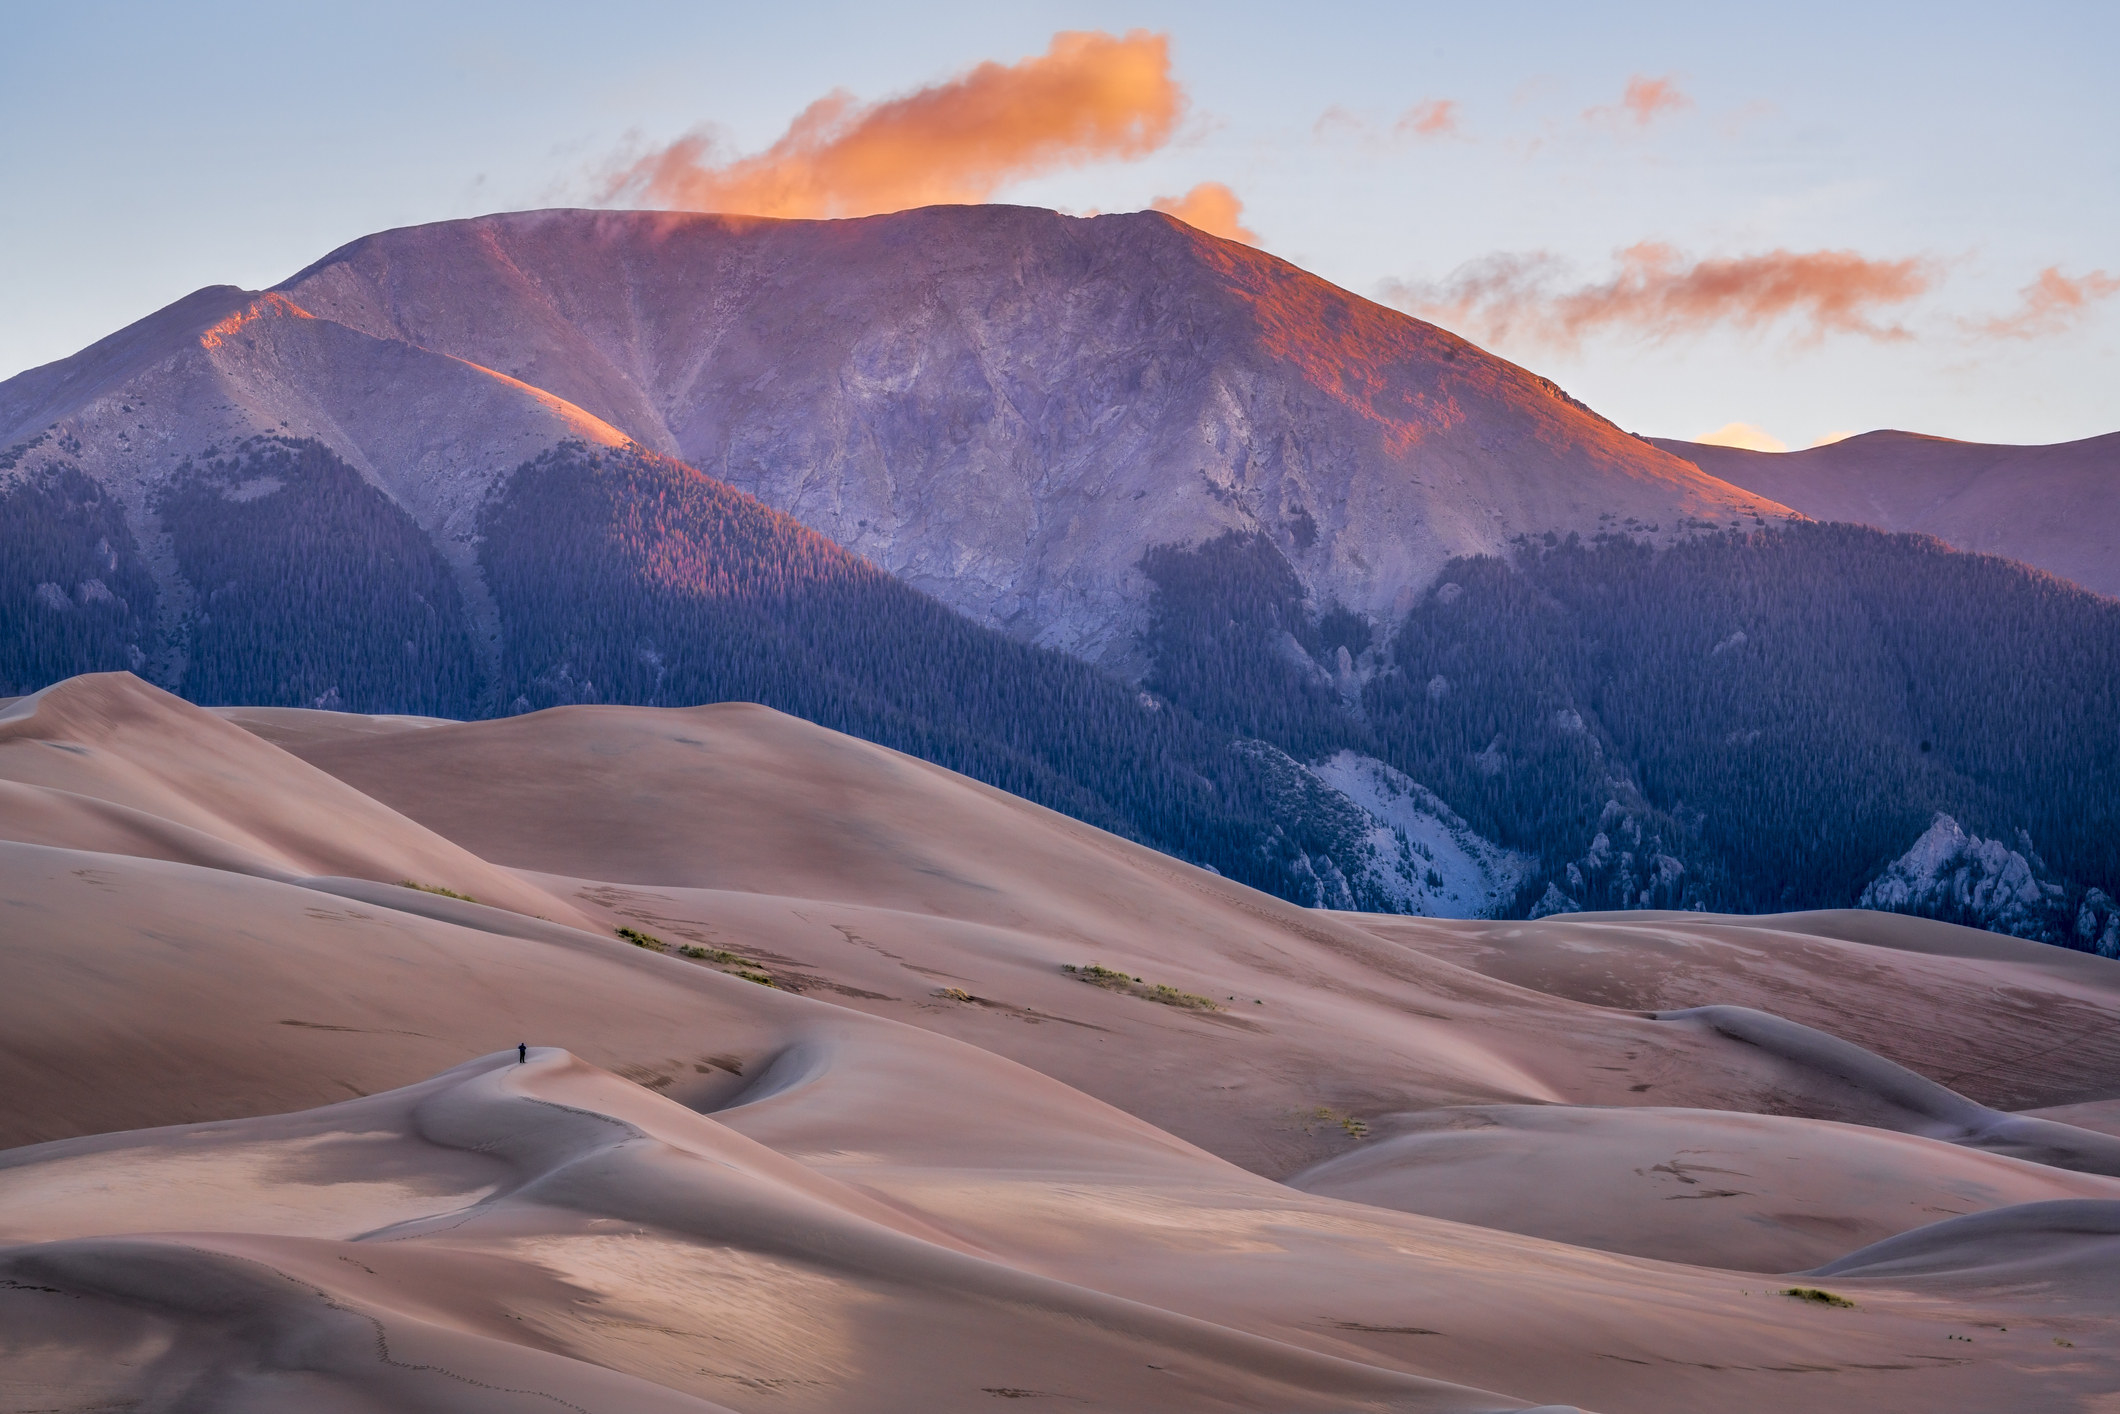 A landscape shot of Great Sand Dunes National Park at sunrise, showing pink-colored dunes against a mountain.